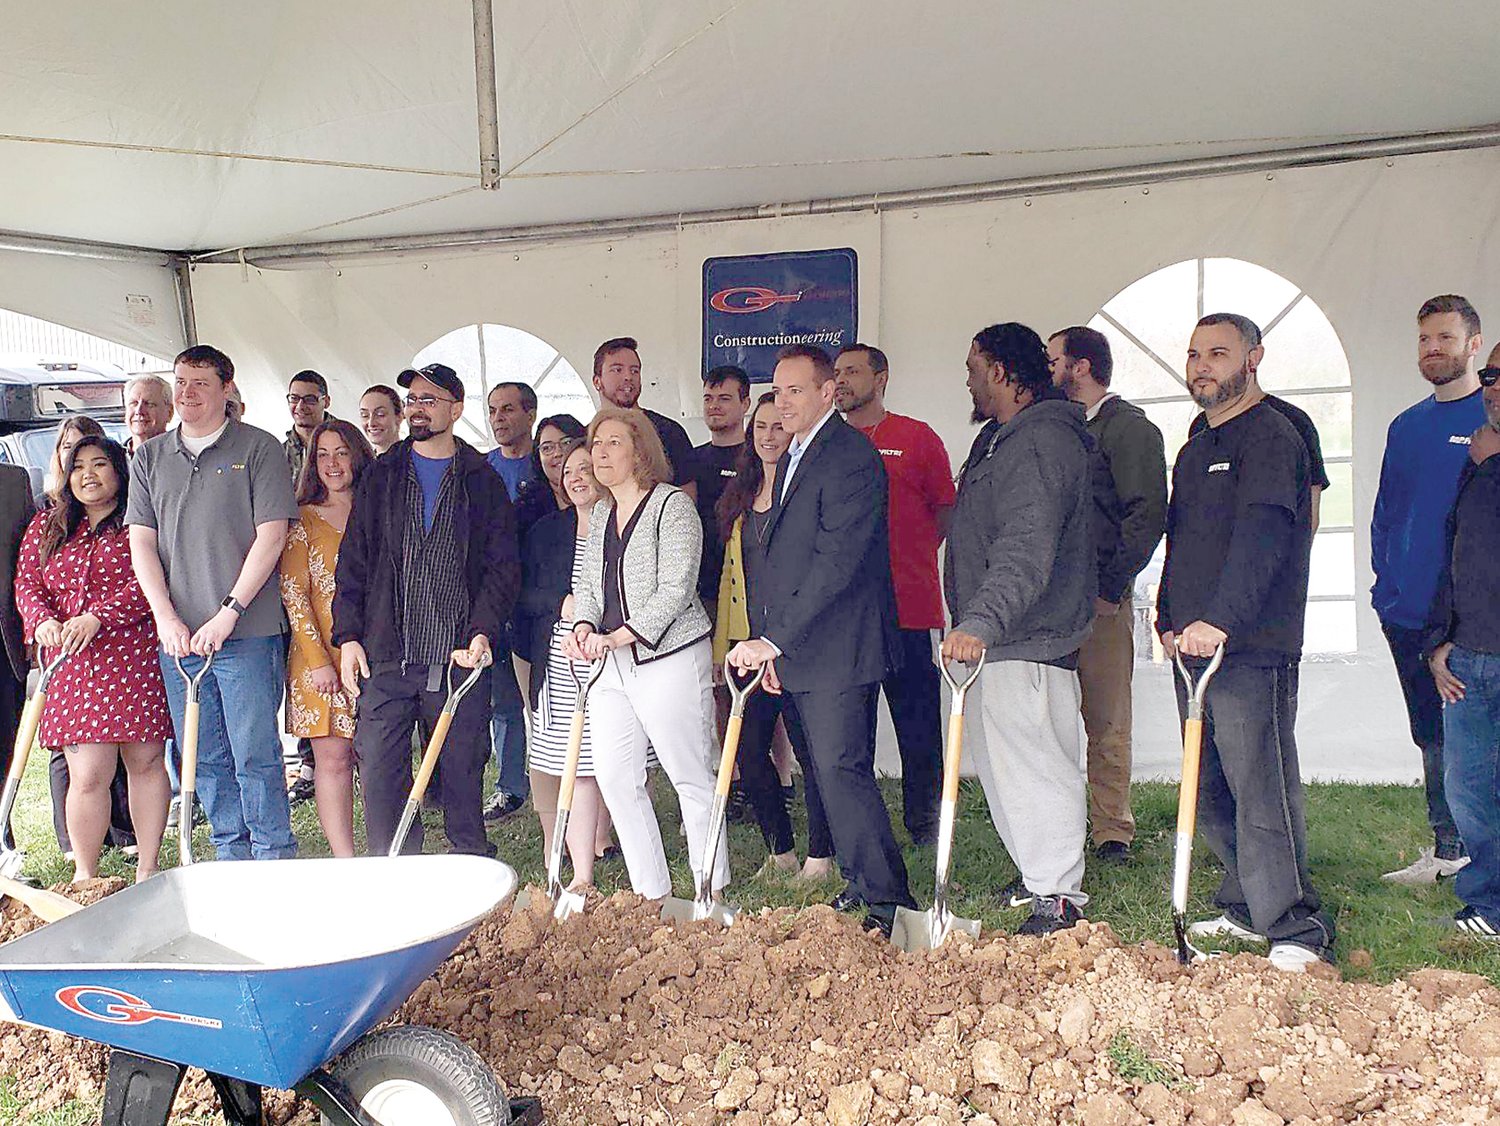 Gorski Engineering of Collegeville, its team and business colleagues, gathered for a groundbreaking ceremony to mark the construction of MP Filtri USA Inc. at the Northfield Business Campus in Richland Township. Photograph by Upper Bucks Chamber of Commerce.